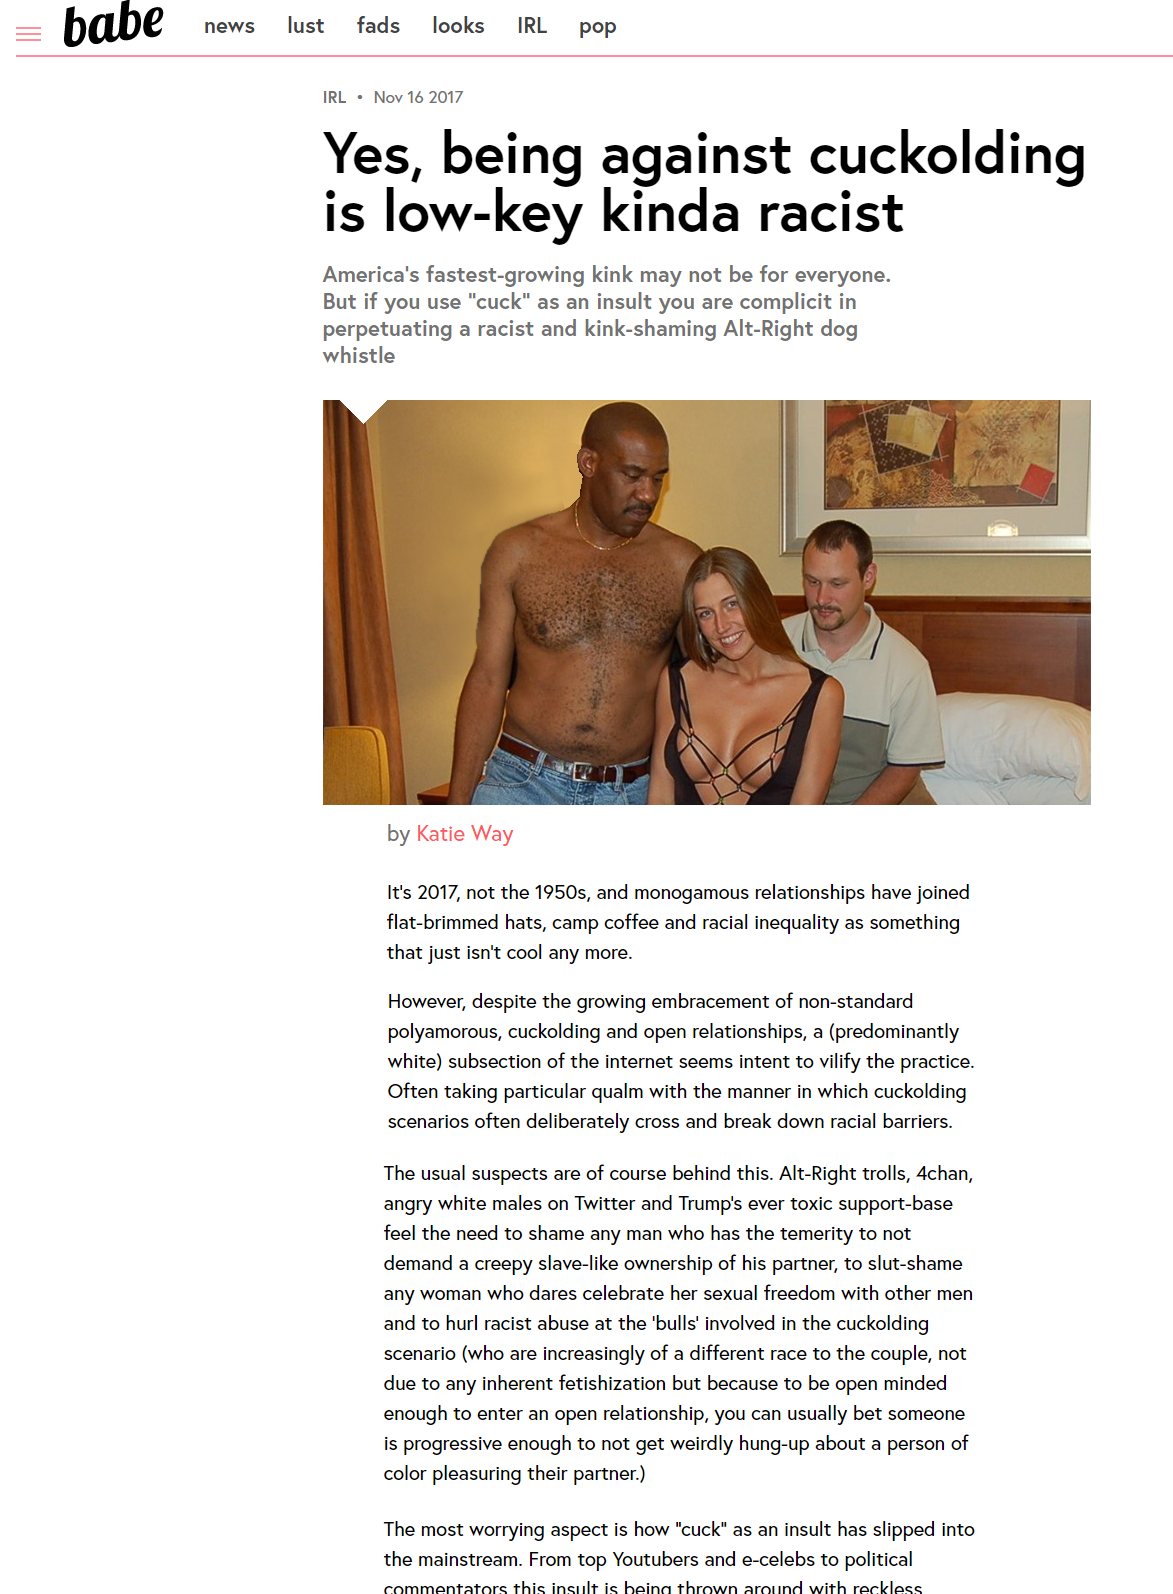 Racist porn from the s